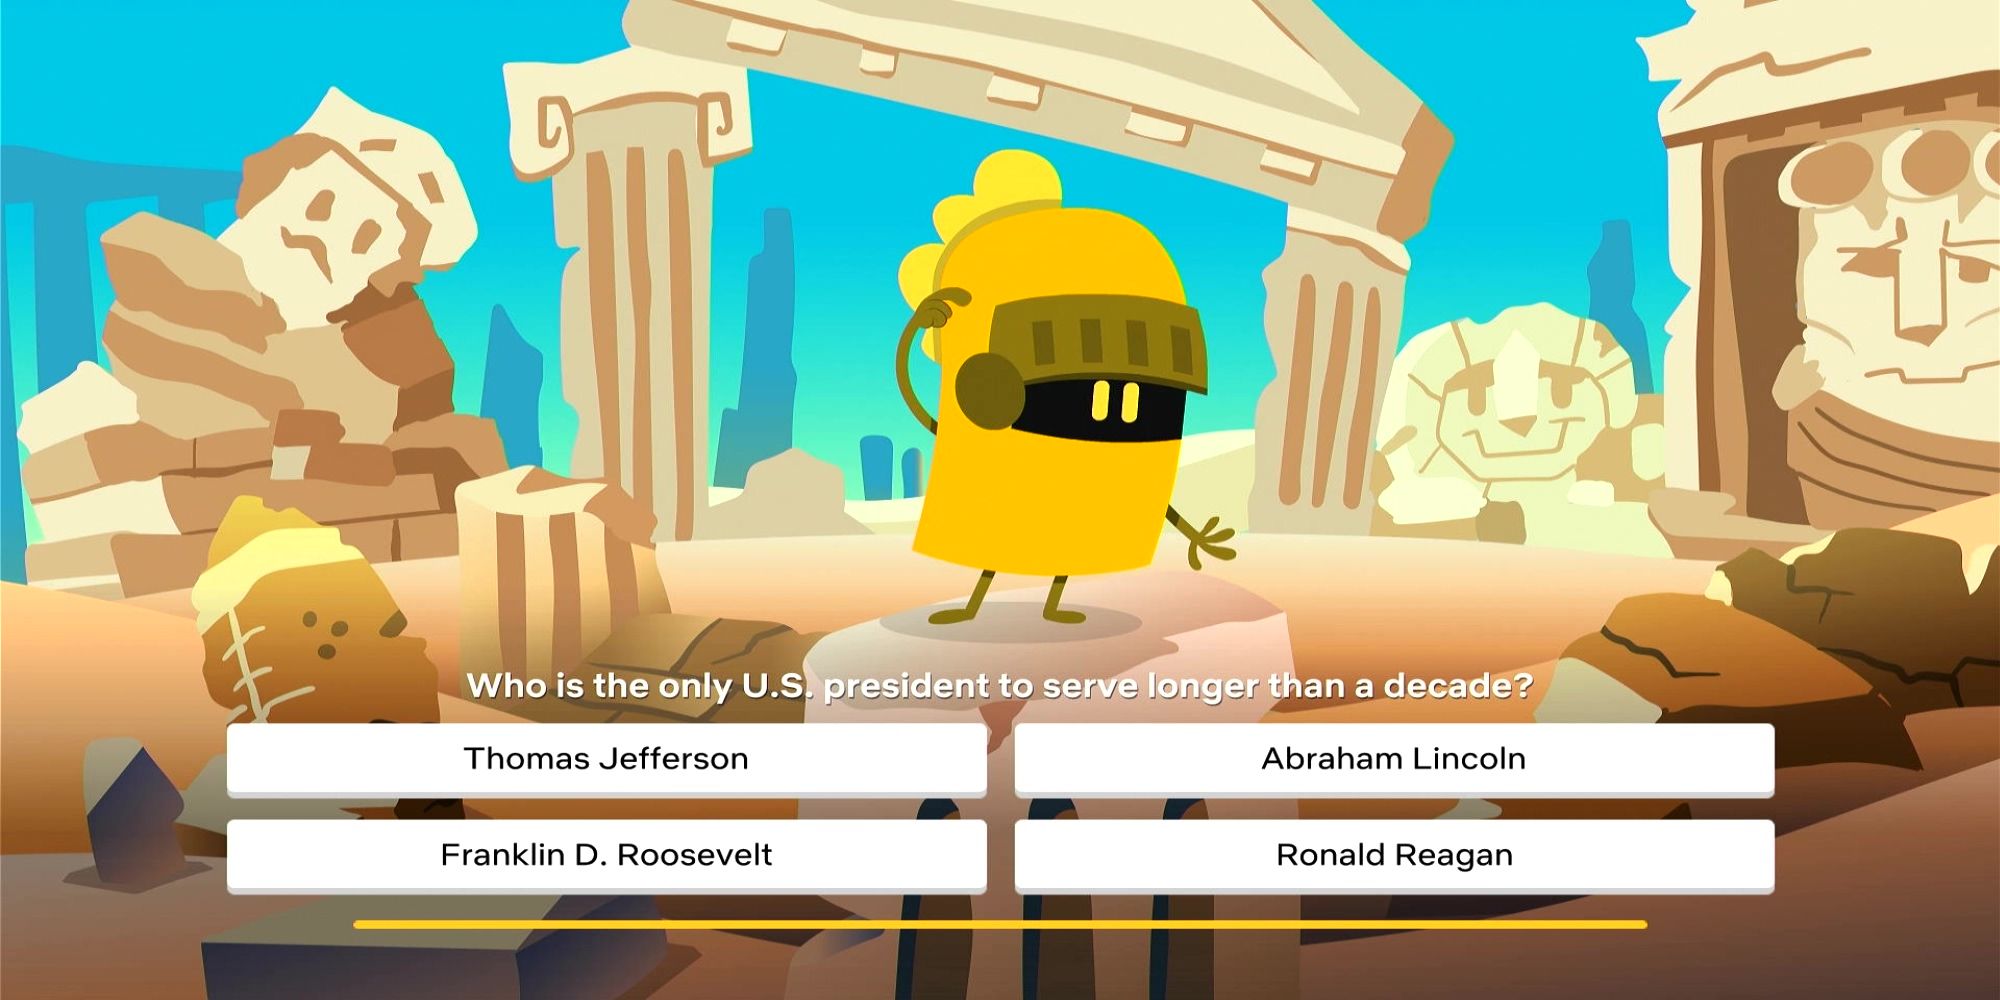 Hector searches the Parthenon while the game asks "Who is the only U.S. president to serve longer than a decade?" Trivia Quest.